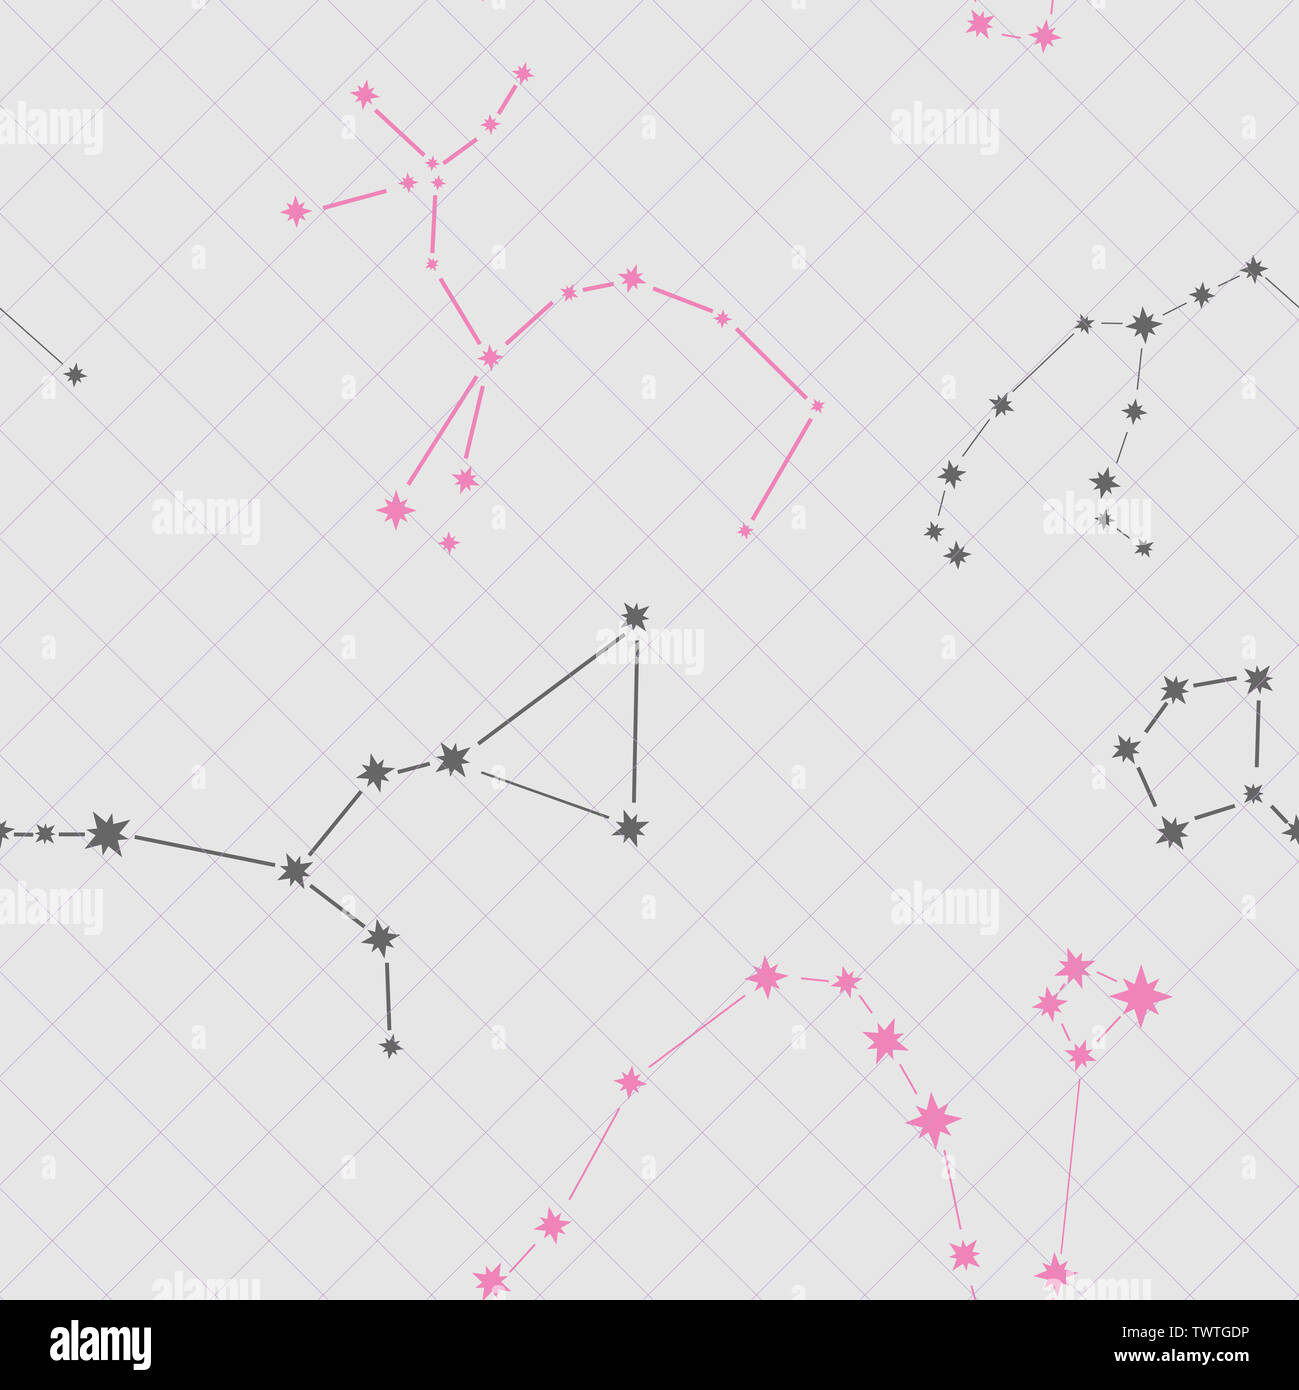 Seamless pattern with constellations and lines Stock Photo